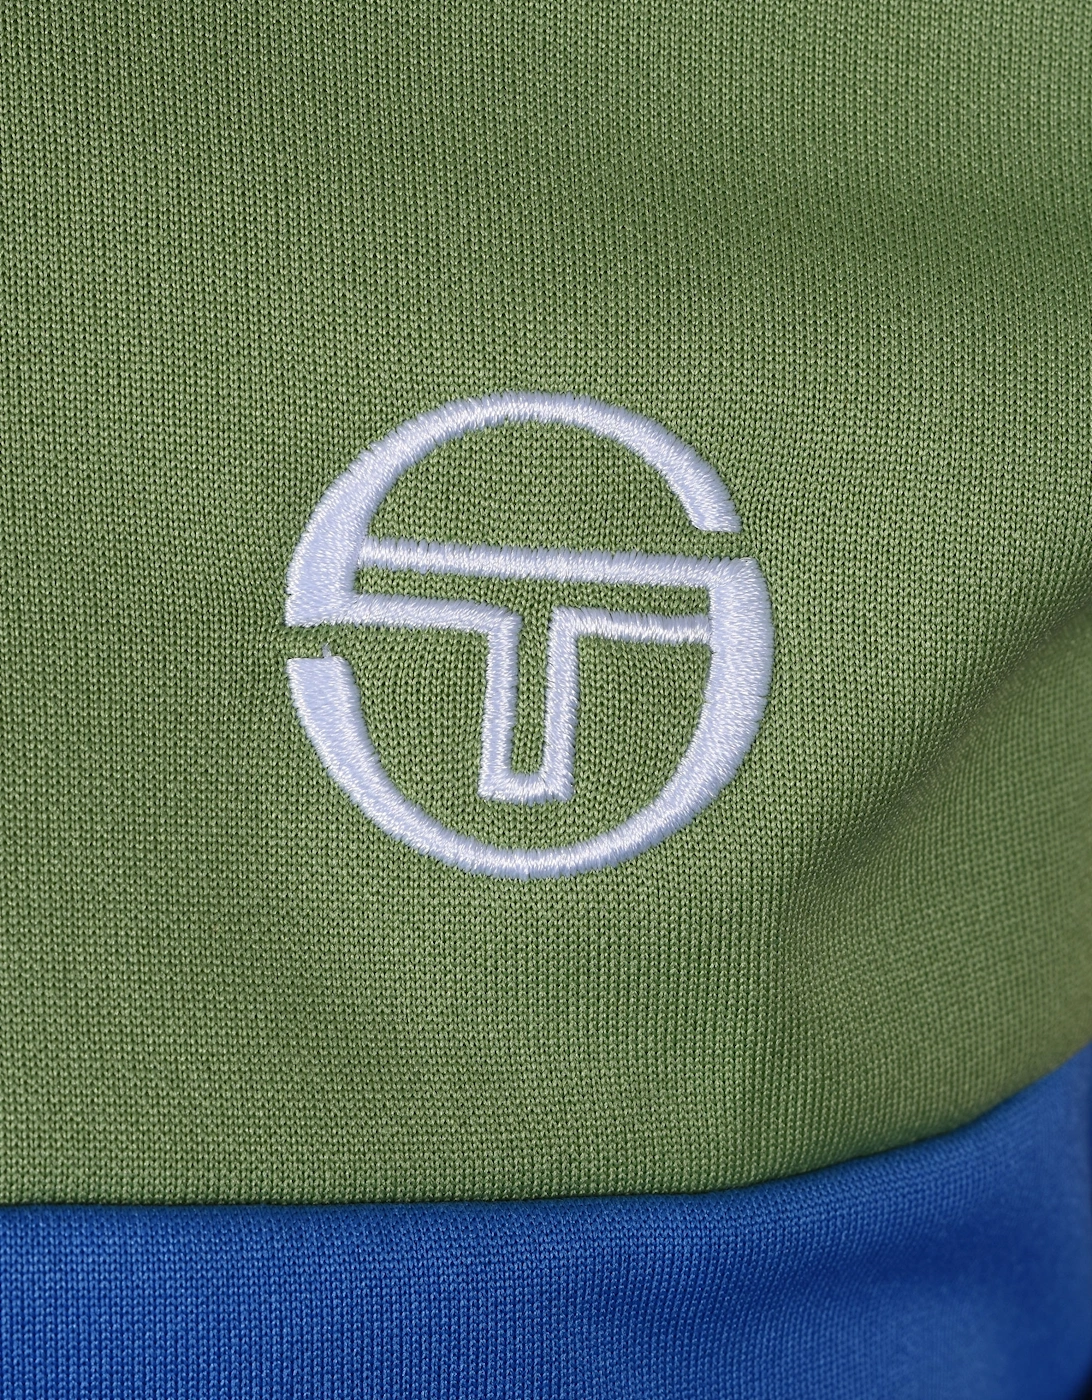 Tomme Track Top Palace Blue/Jade Green